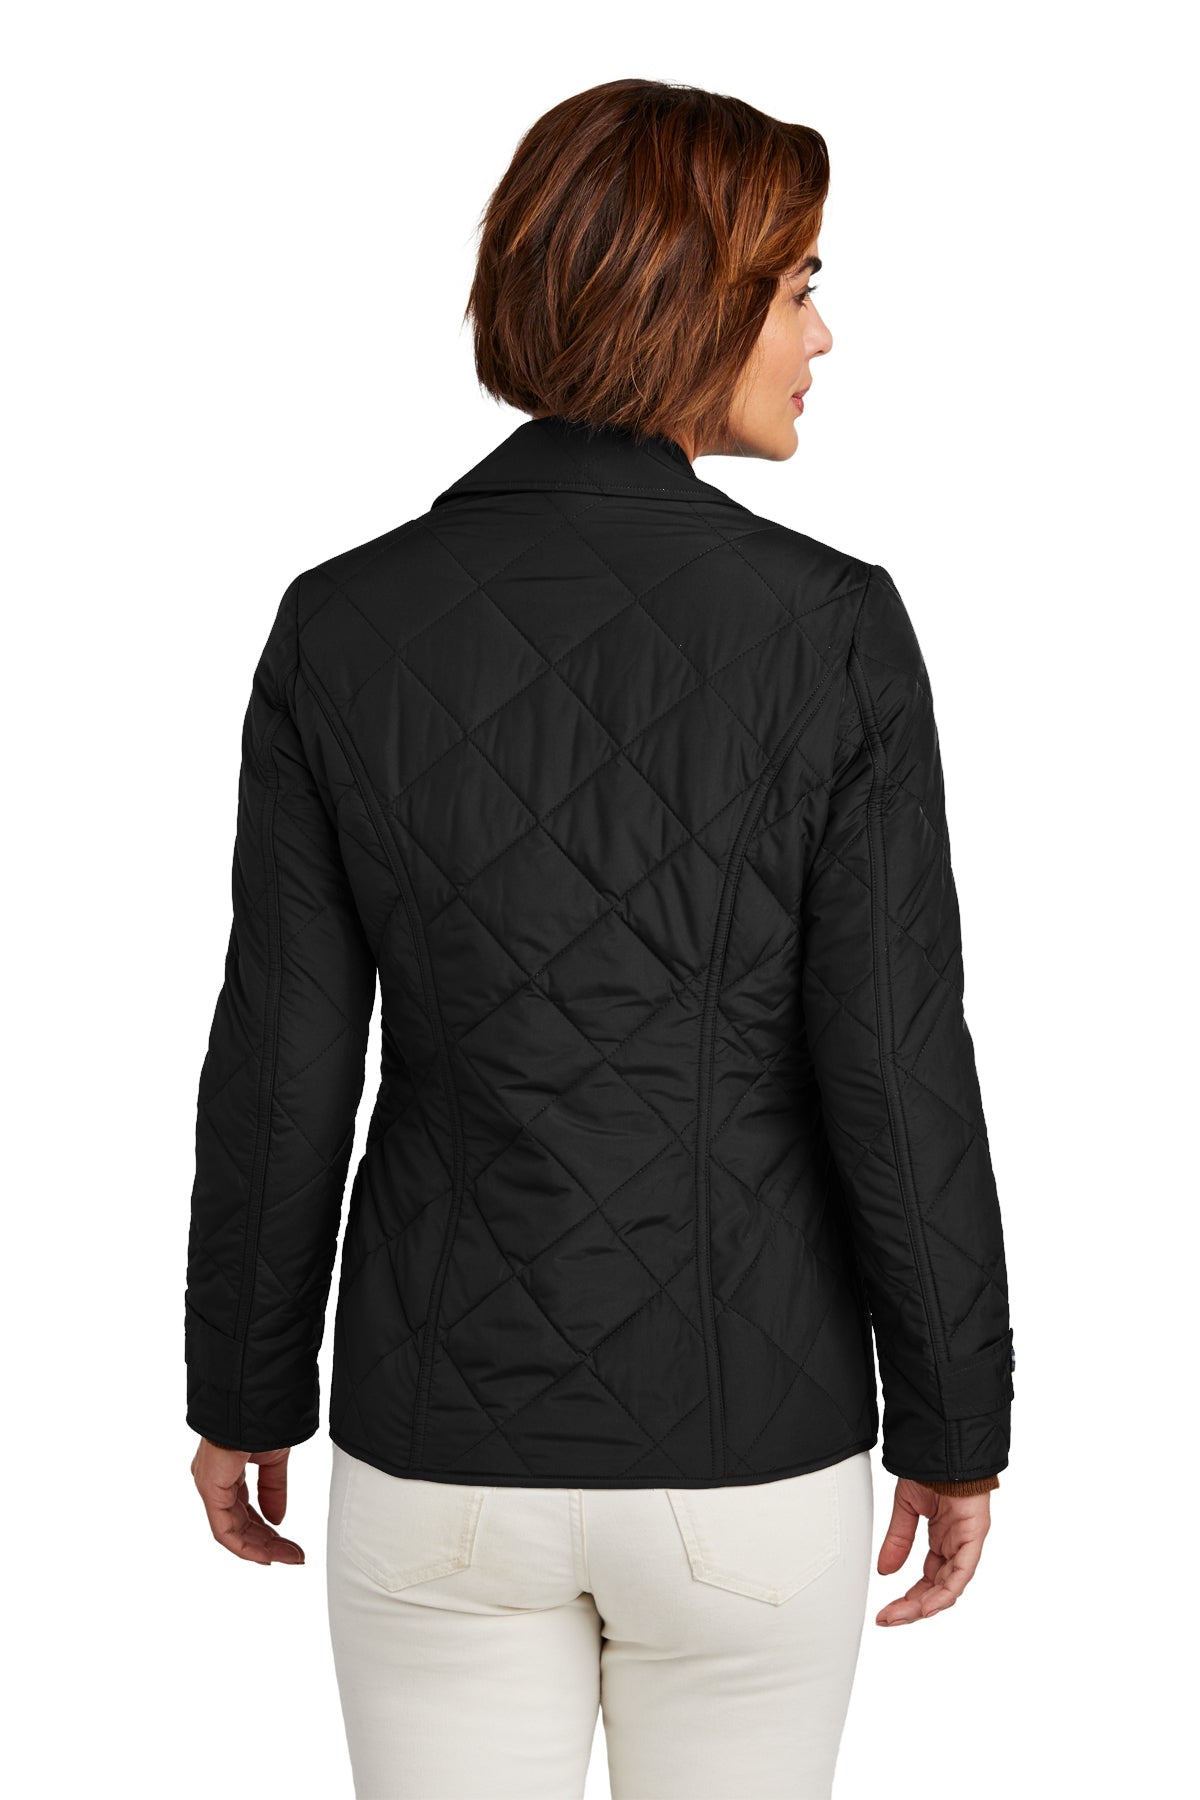 Brooks Brothers Womens Quilted Jacket, Deep Black